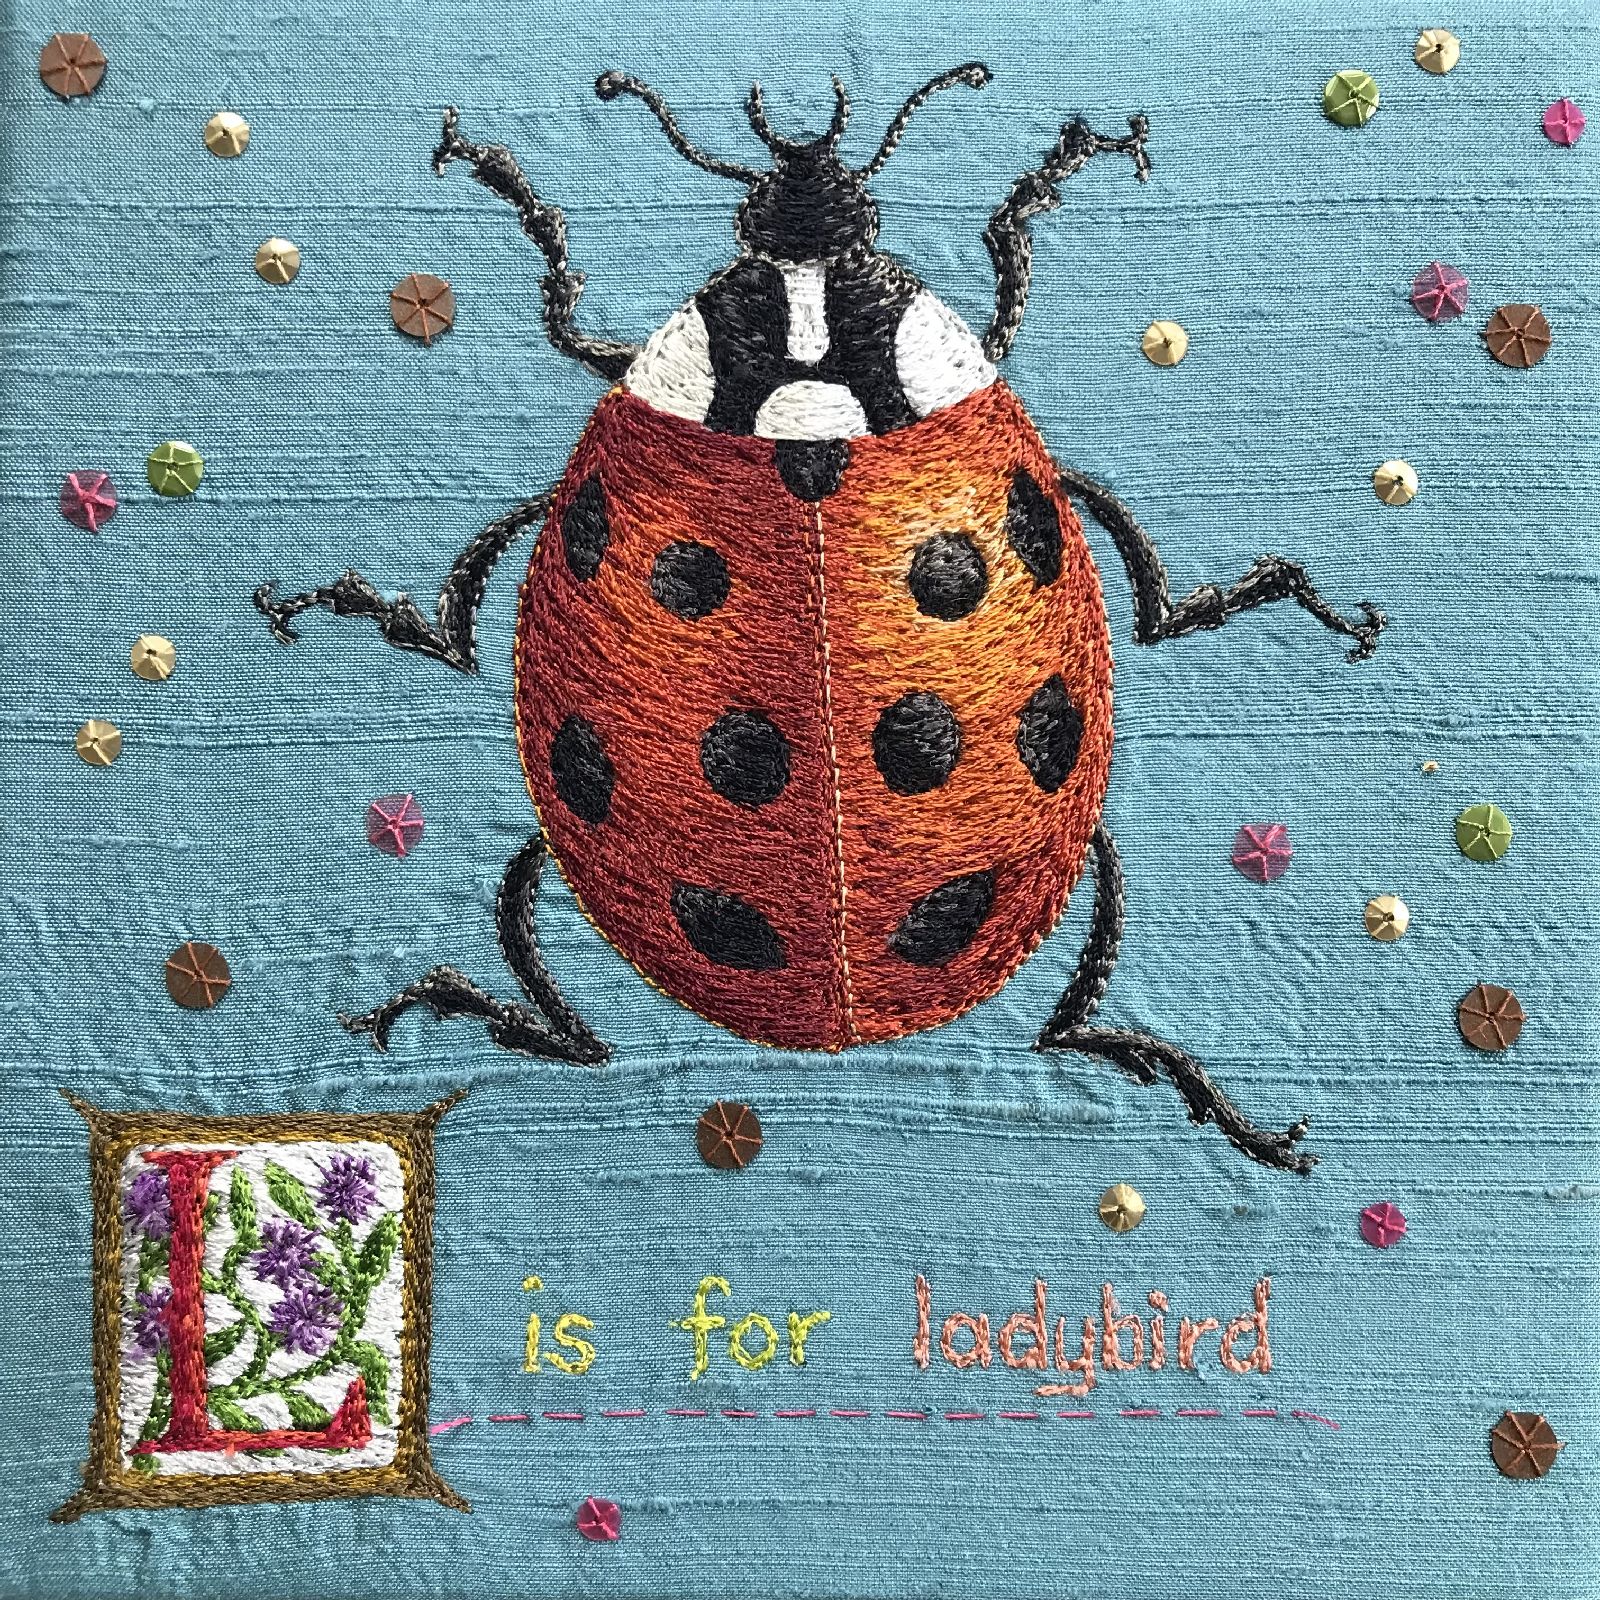 L is for Ladybird by Aileen  Johnston